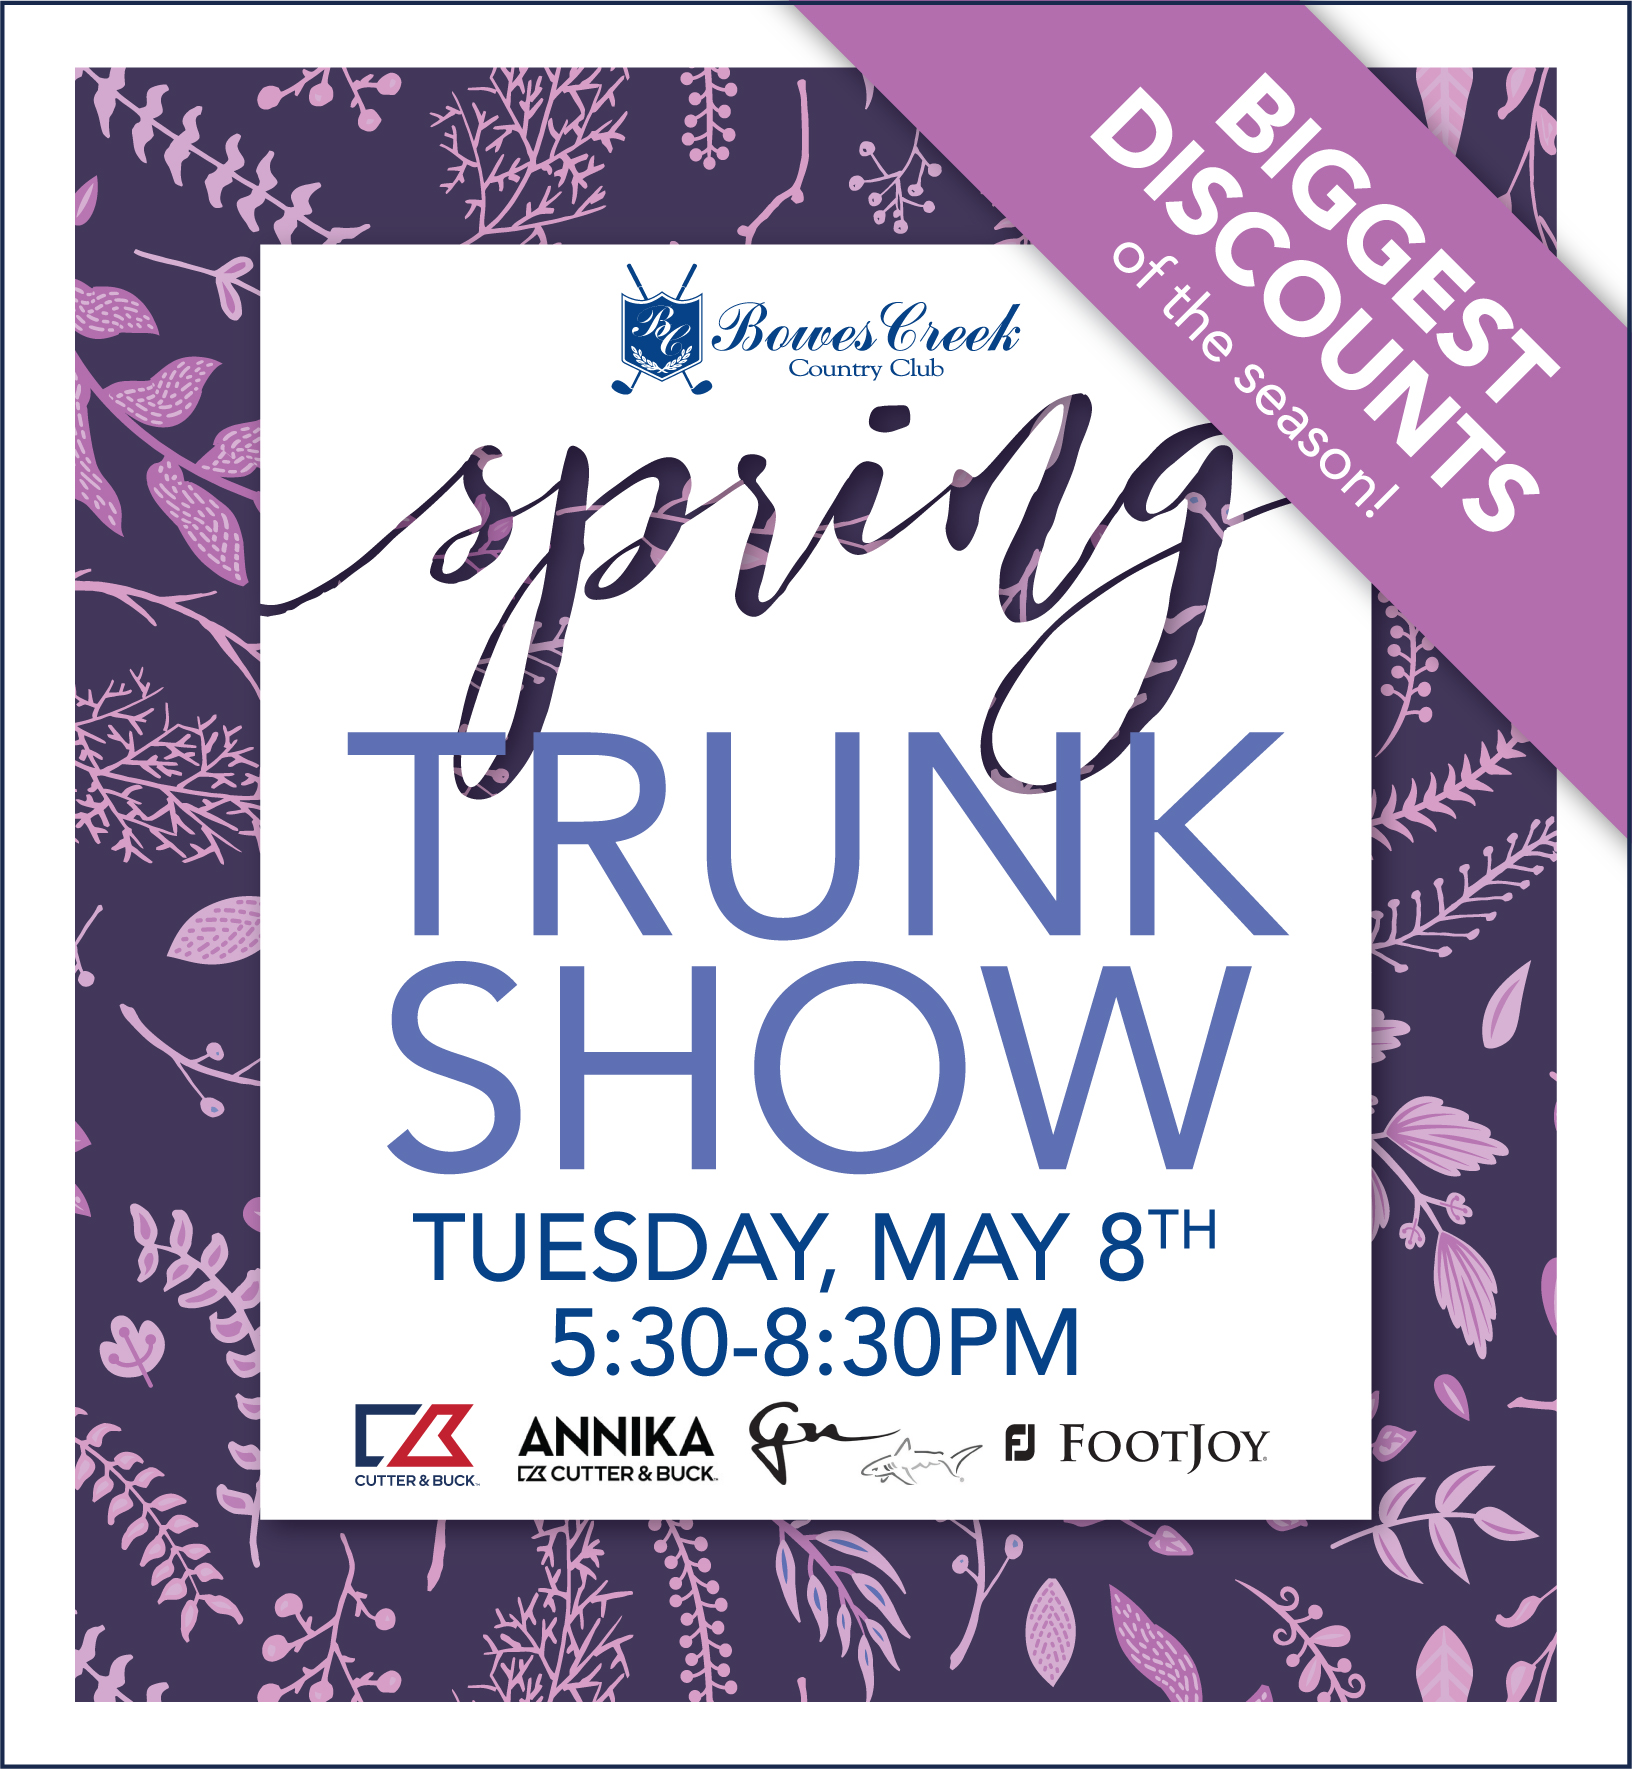 Spring 2018 Trunk Show at Bowes Creek Country Club